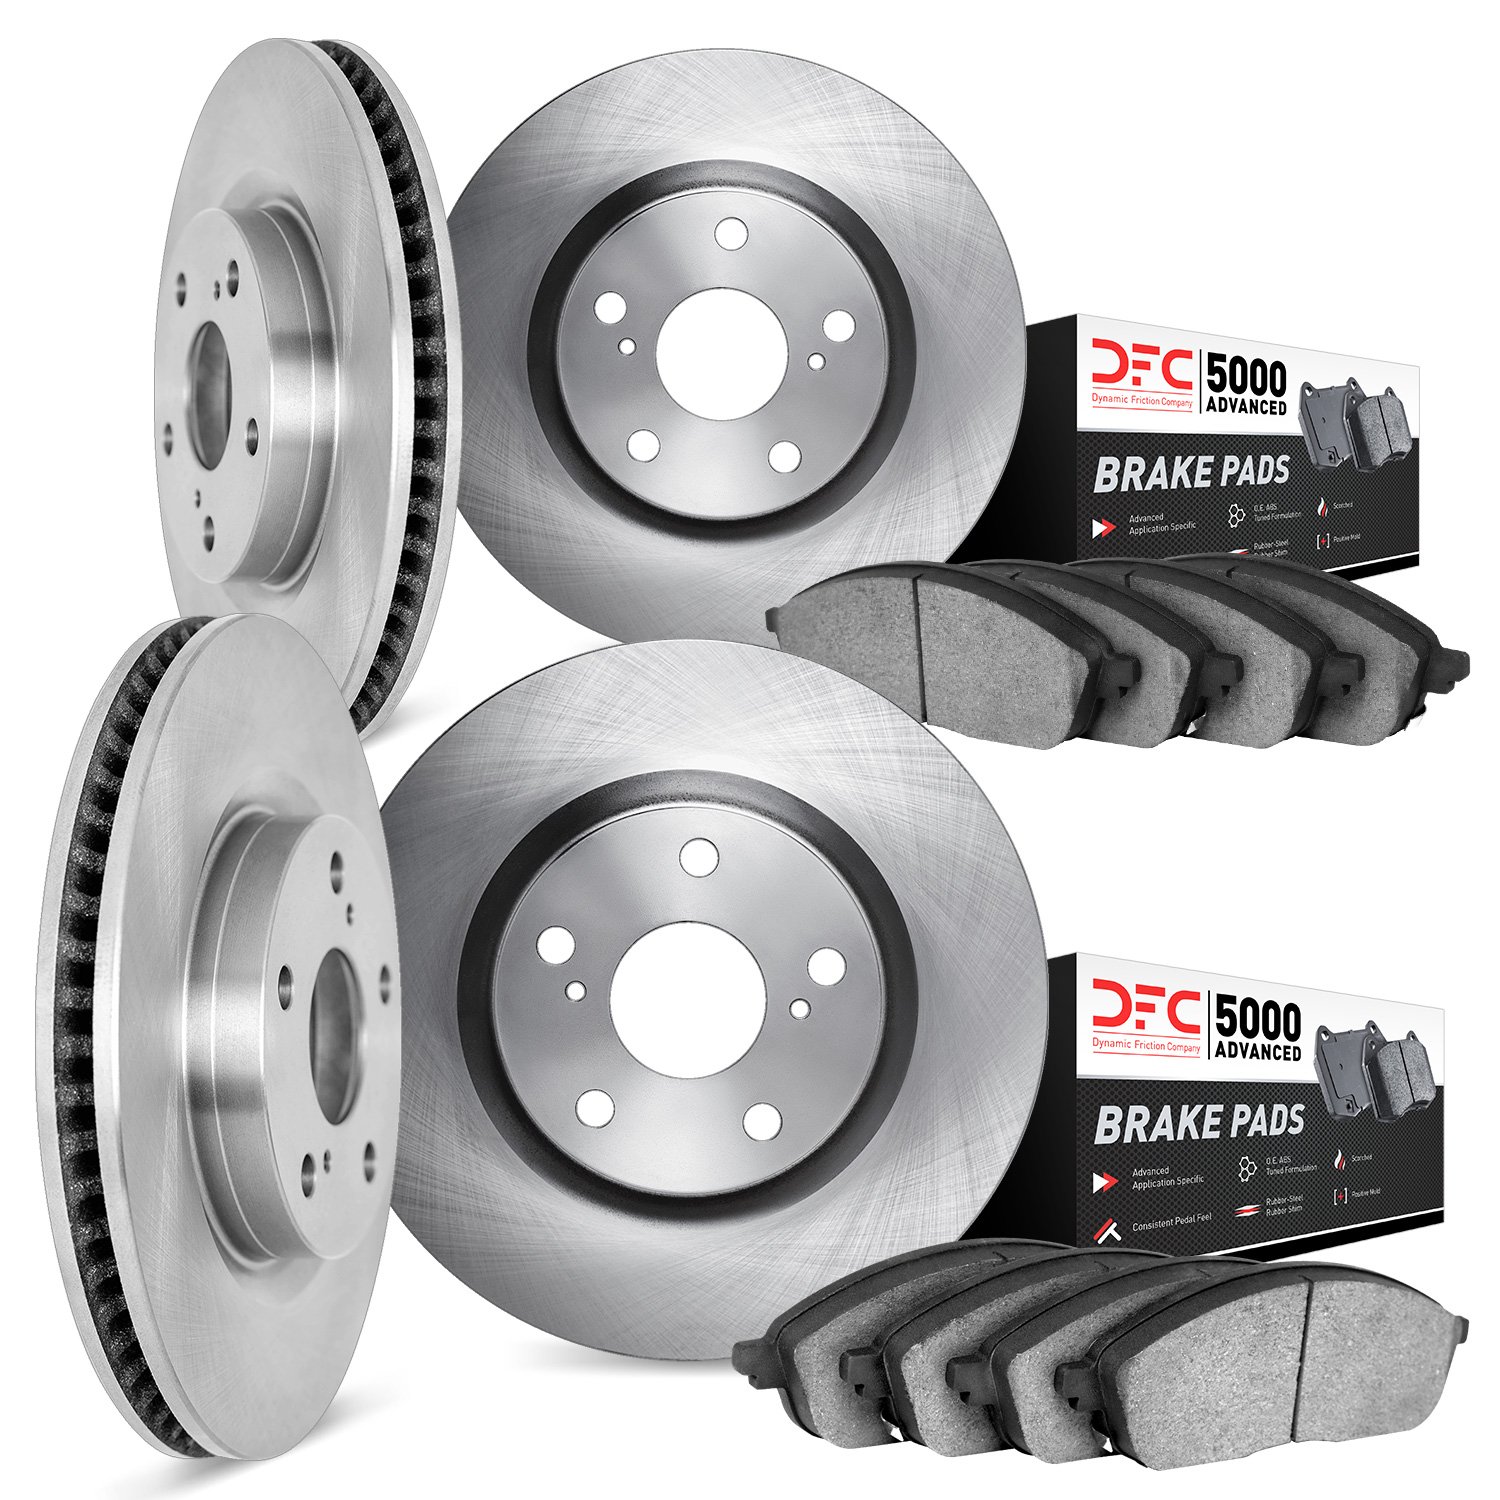 6504-75029 Brake Rotors w/5000 Advanced Brake Pads Kit, Fits Select Lexus/Toyota/Scion, Position: Front and Rear